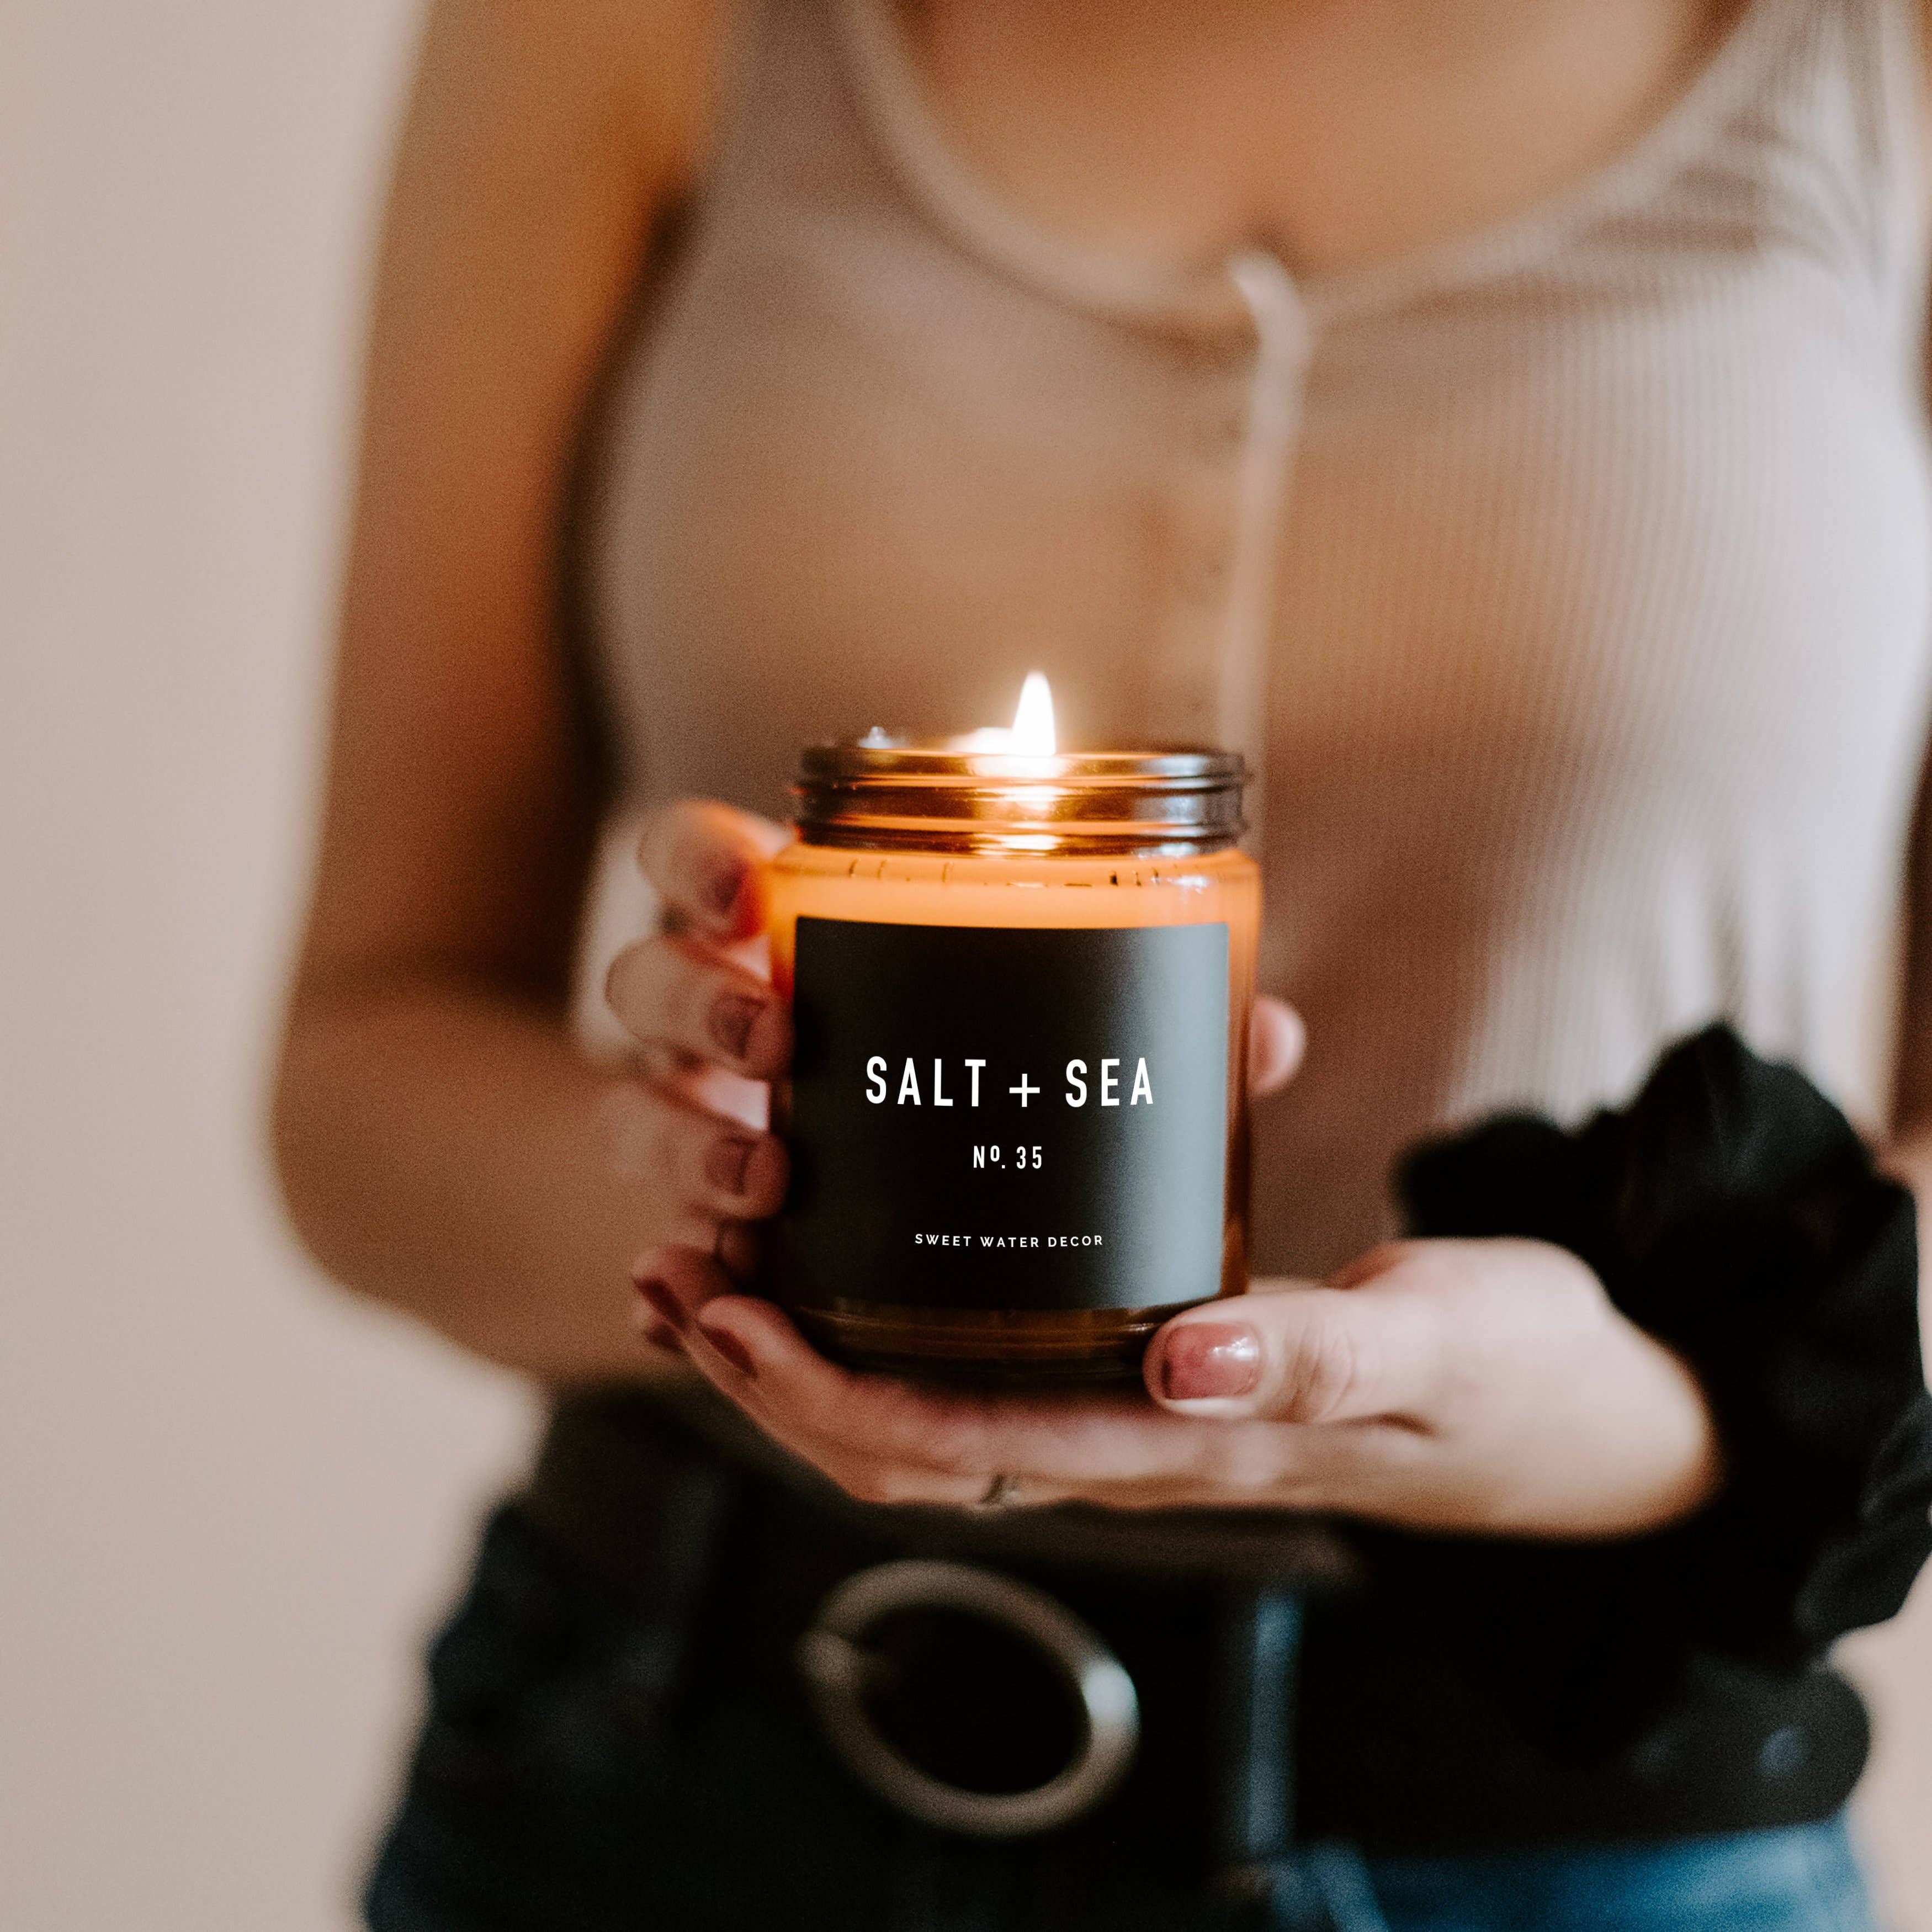 Salt and Sea Soy Candle | Amber Jar Candle